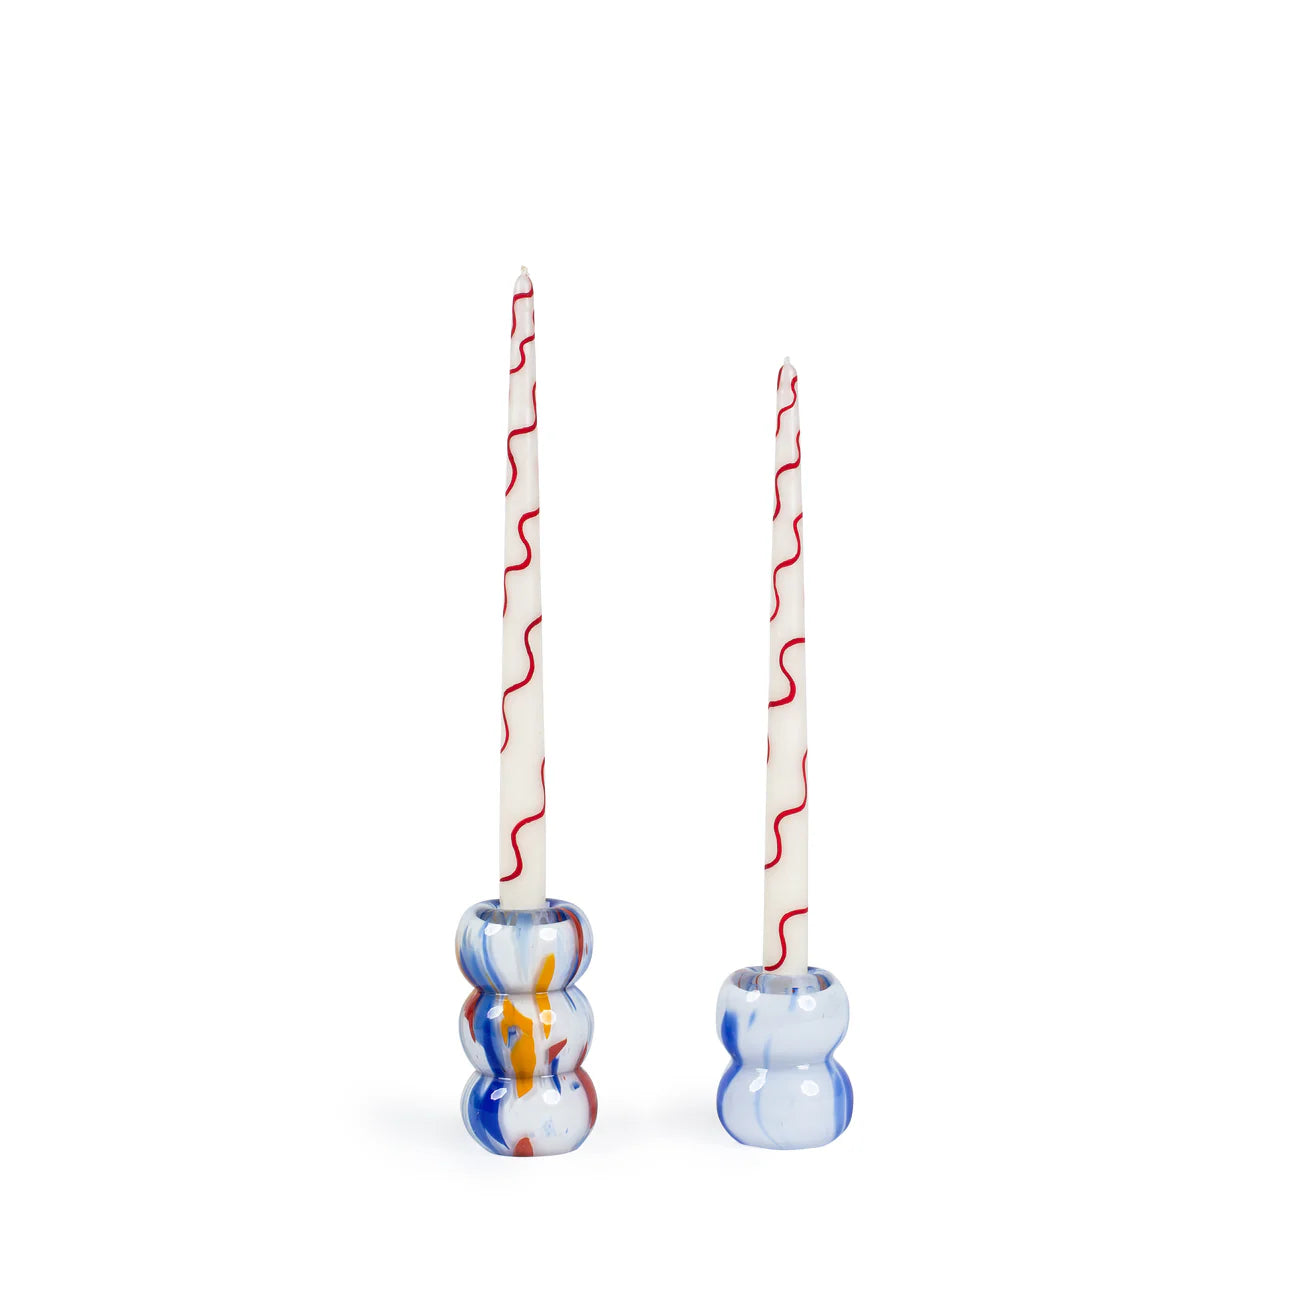 Primary Confetti Candleholders